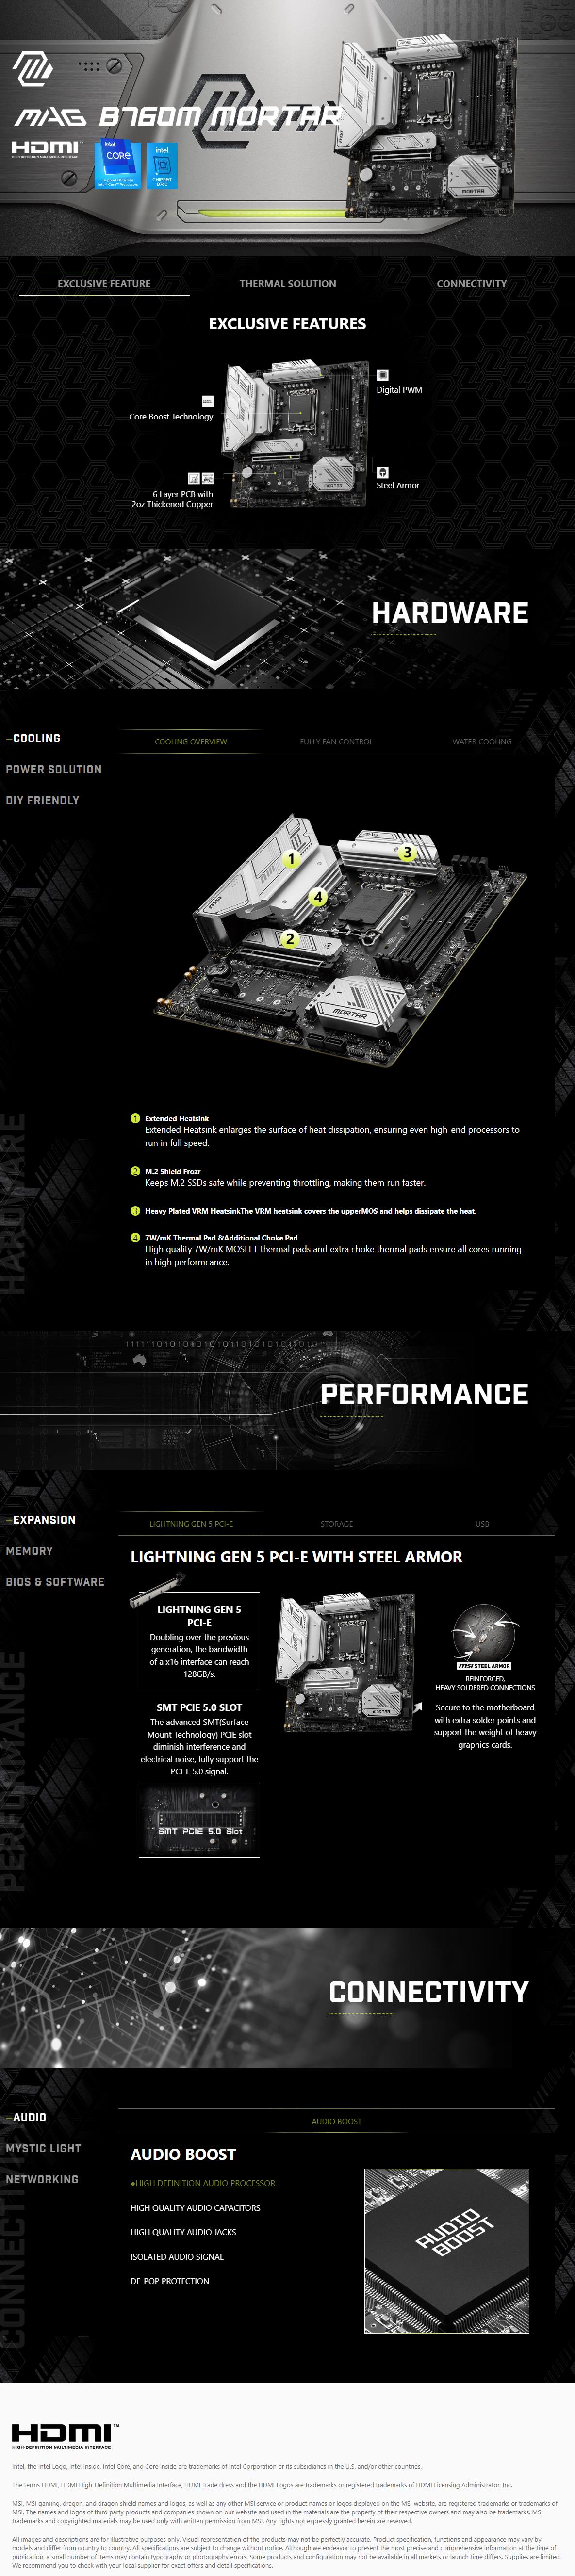 A large marketing image providing additional information about the product MSI MAG B760M Mortar LGA1700 mATX Desktop Motherboard - Additional alt info not provided